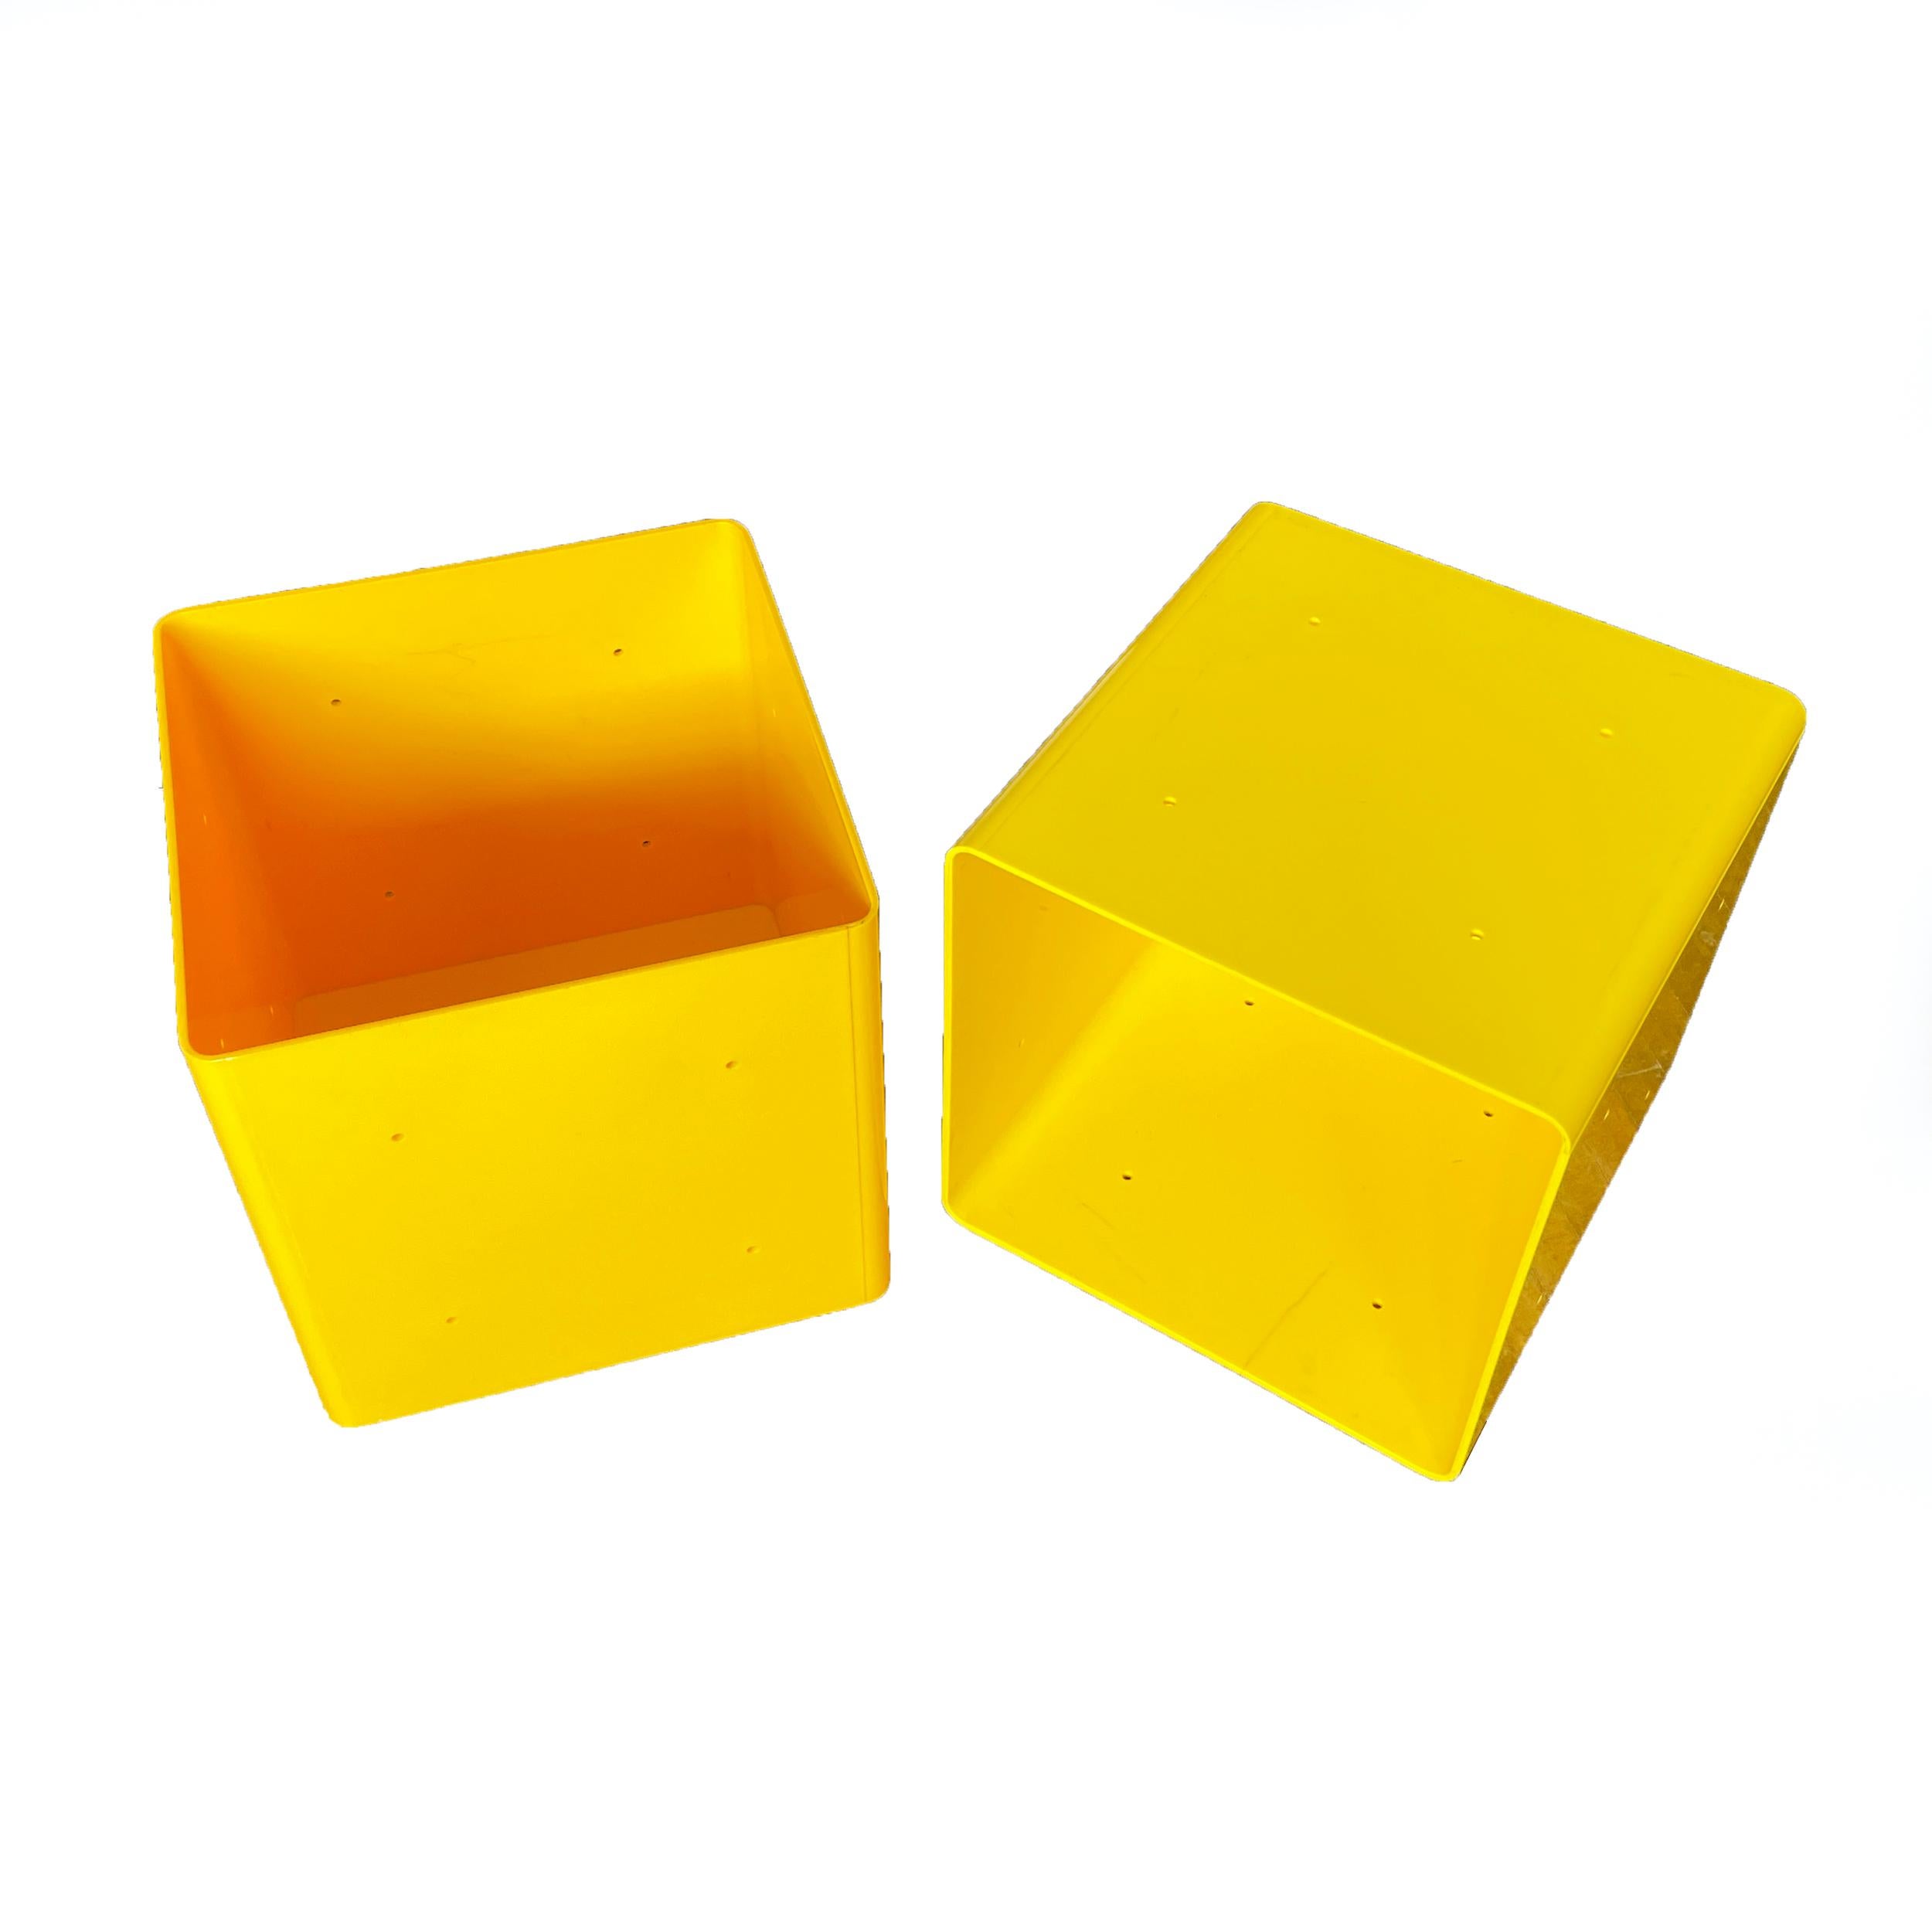 Pair of Vintage Yellow Plastic Record or Storage Cubes 1